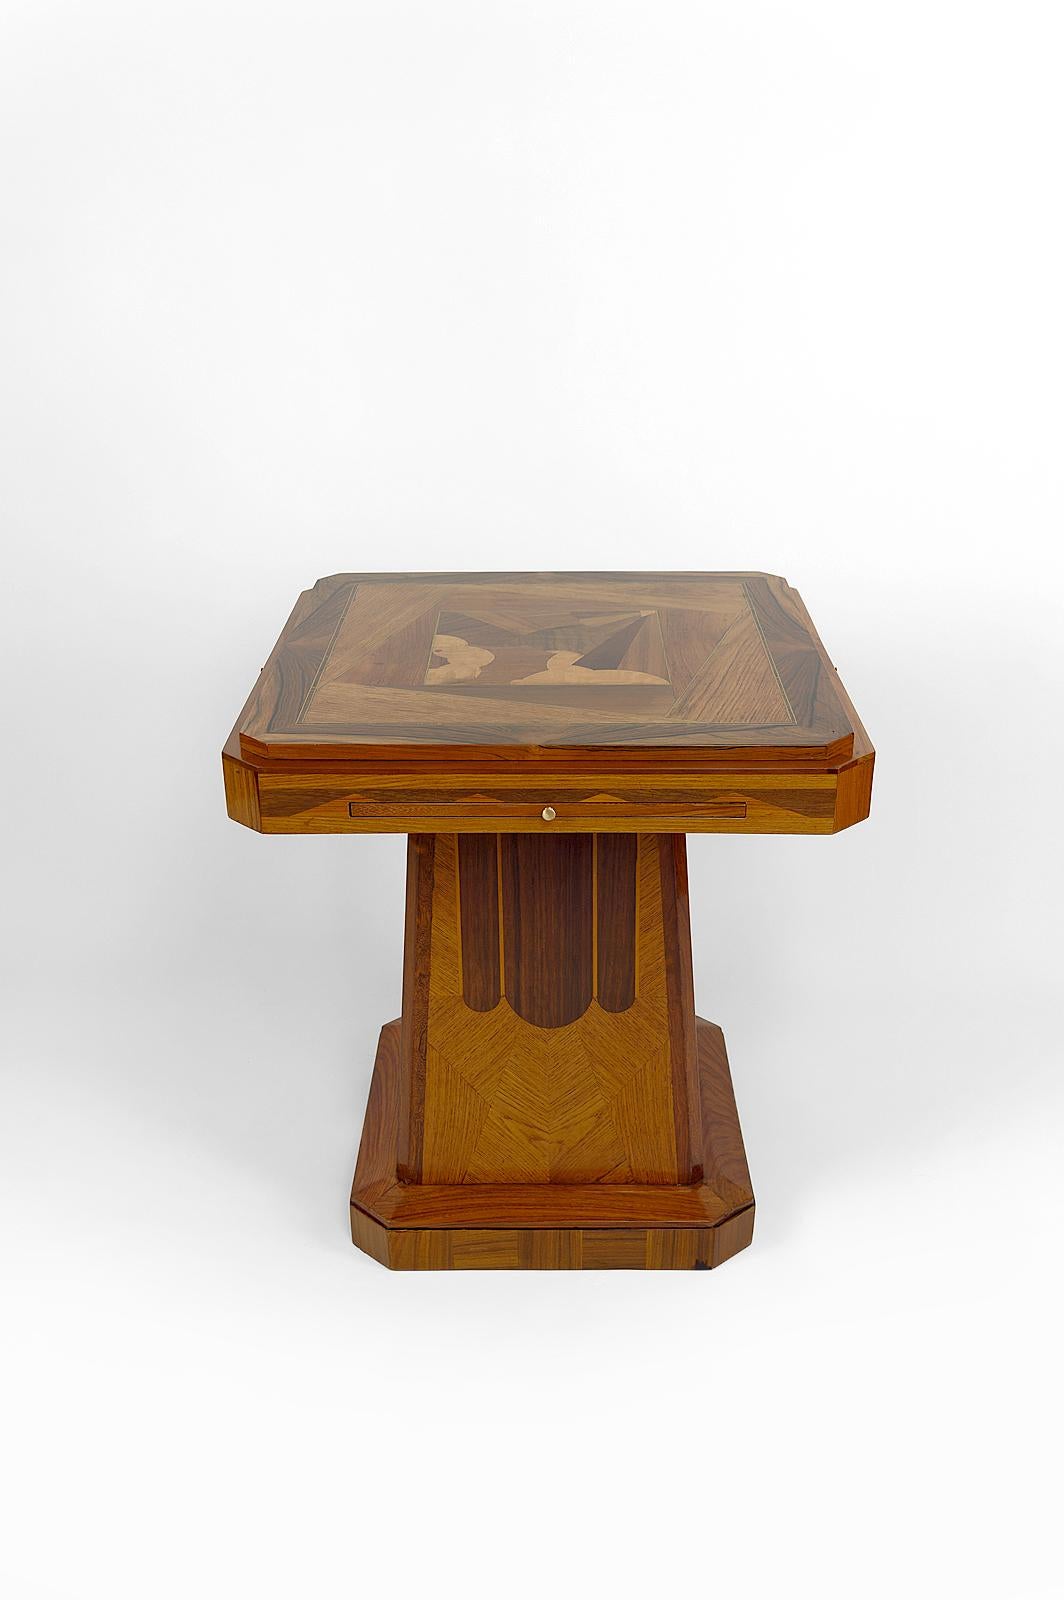 Early 20th Century Inlaid Art Deco Game Table, France, circa 1925